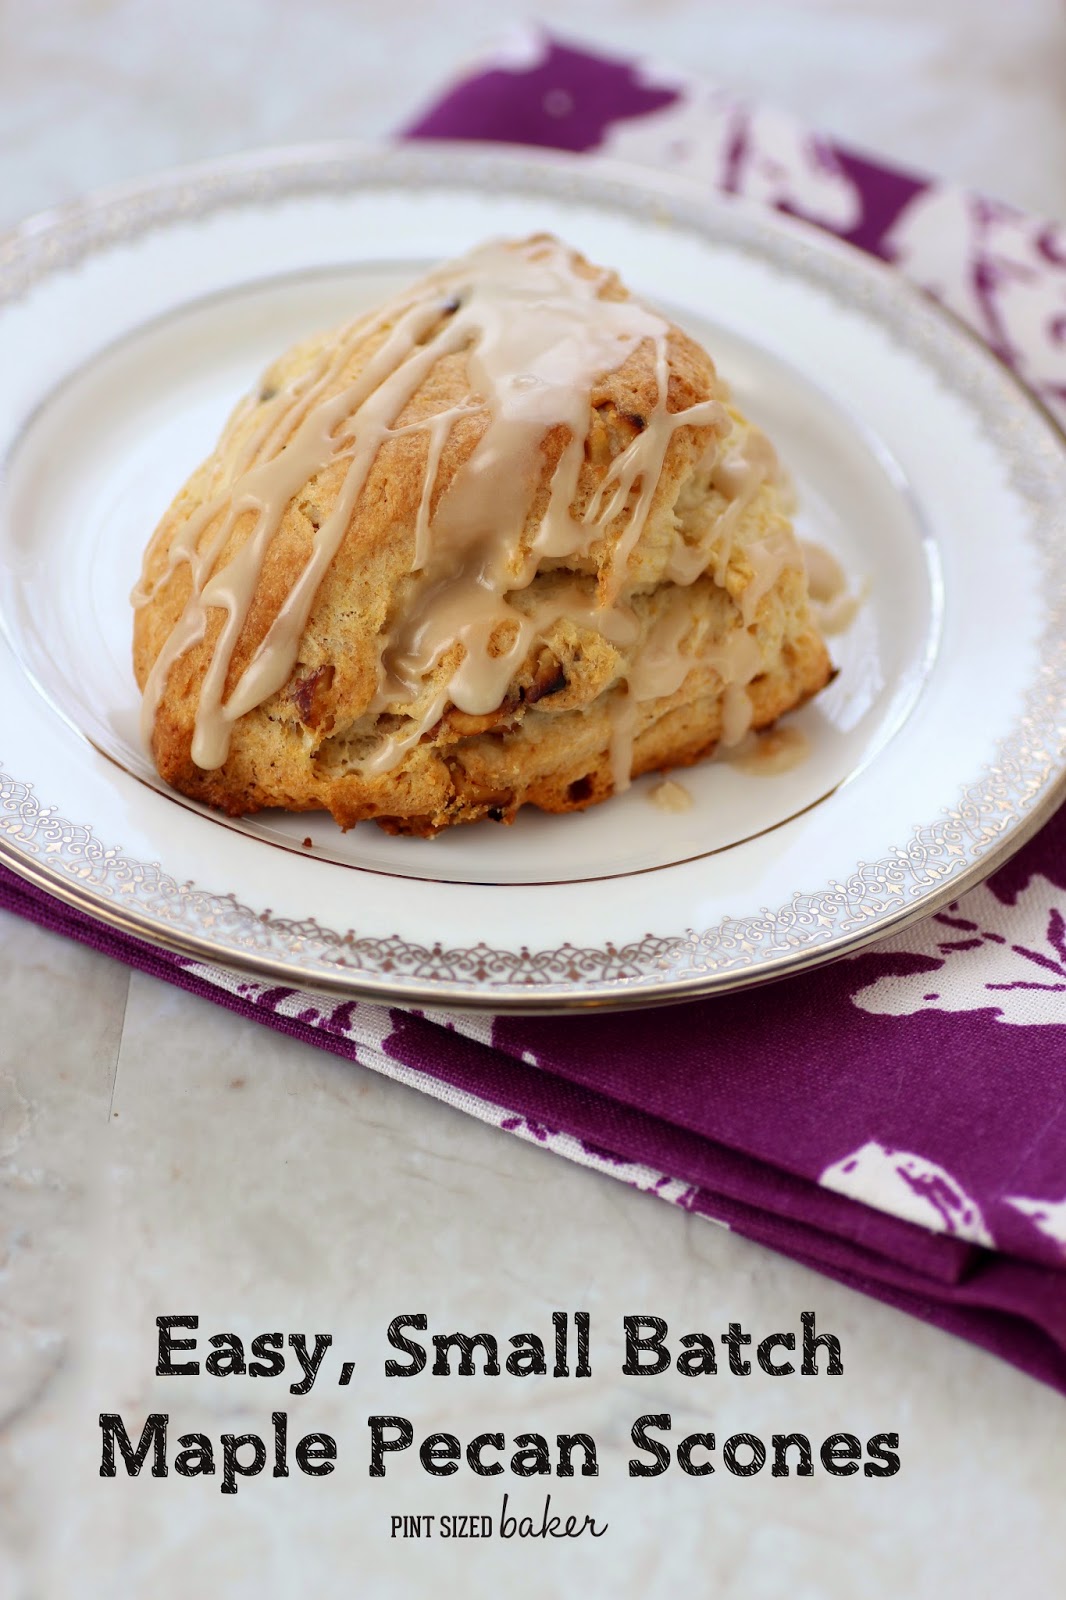 A quick an easy recipe for Maple Pecan Scones. Makes just 4 - perfect for an easy weekend breakfast.